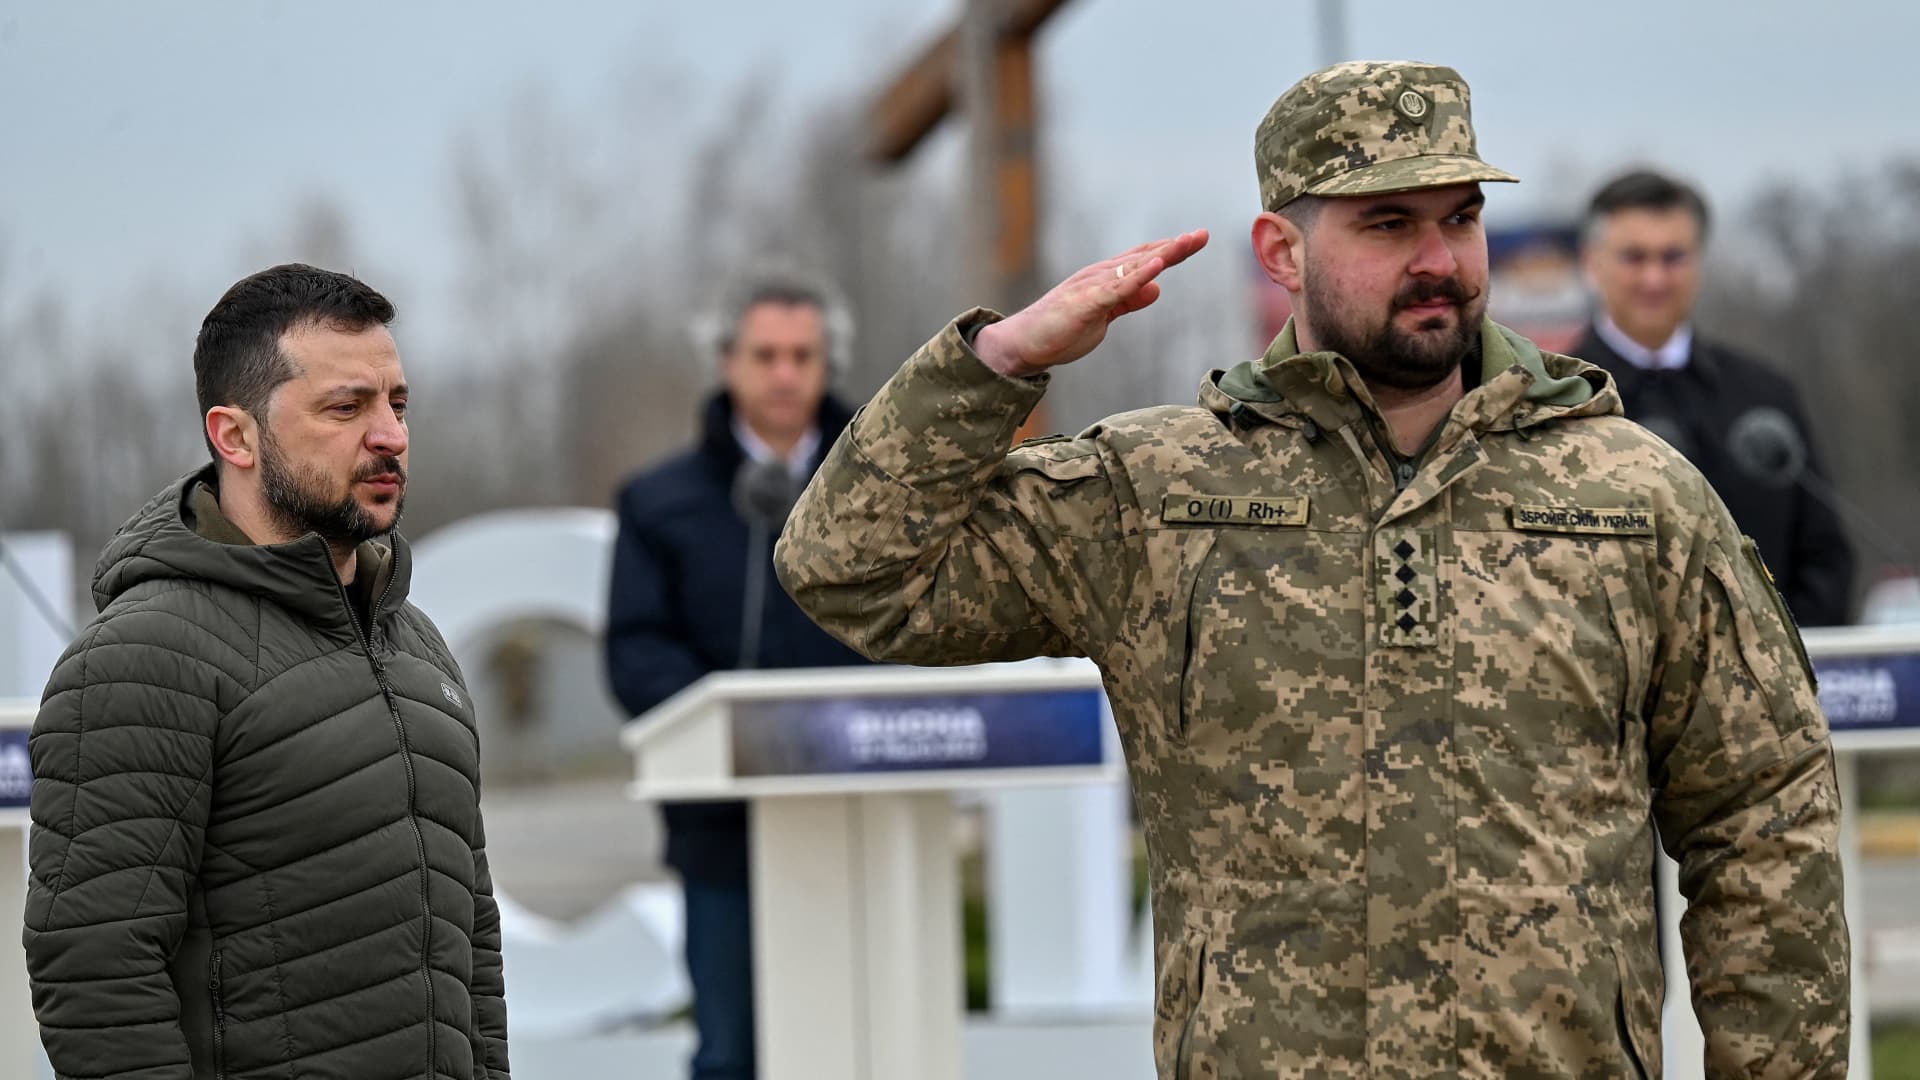 A Ukrainian serviceman salutes as he receives an award from Ukraine's President Volodymyr Zelensky (L), as part of a ceremony marking the first anniversary of the retreat of Russian troops from the Ukrainian town of Bucha, in Bucha, near Kyiv, on March 31, 2023.